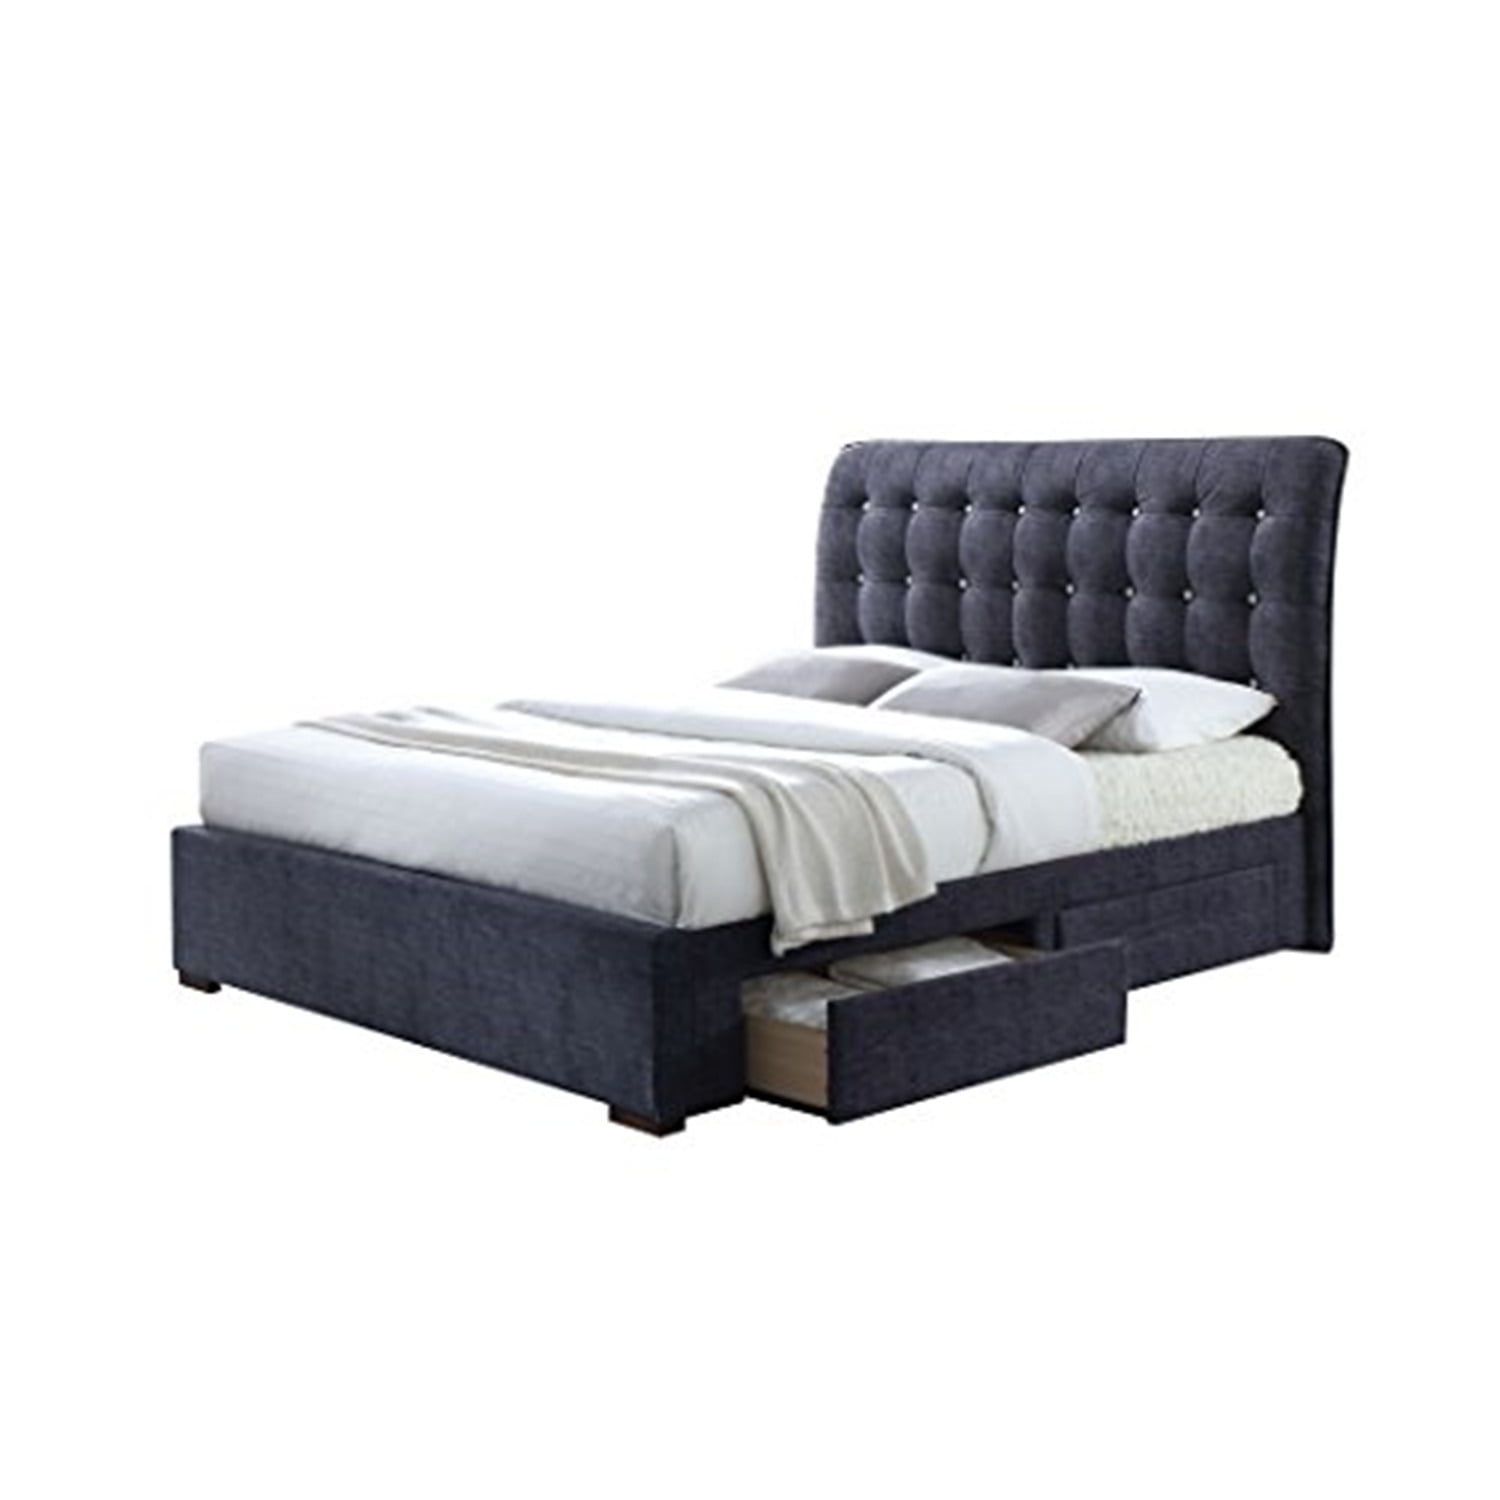 Picture of ACME 25677EK 5 Piece Drorit Eastern King Size Bed with Storage - Dark Gray Fabric